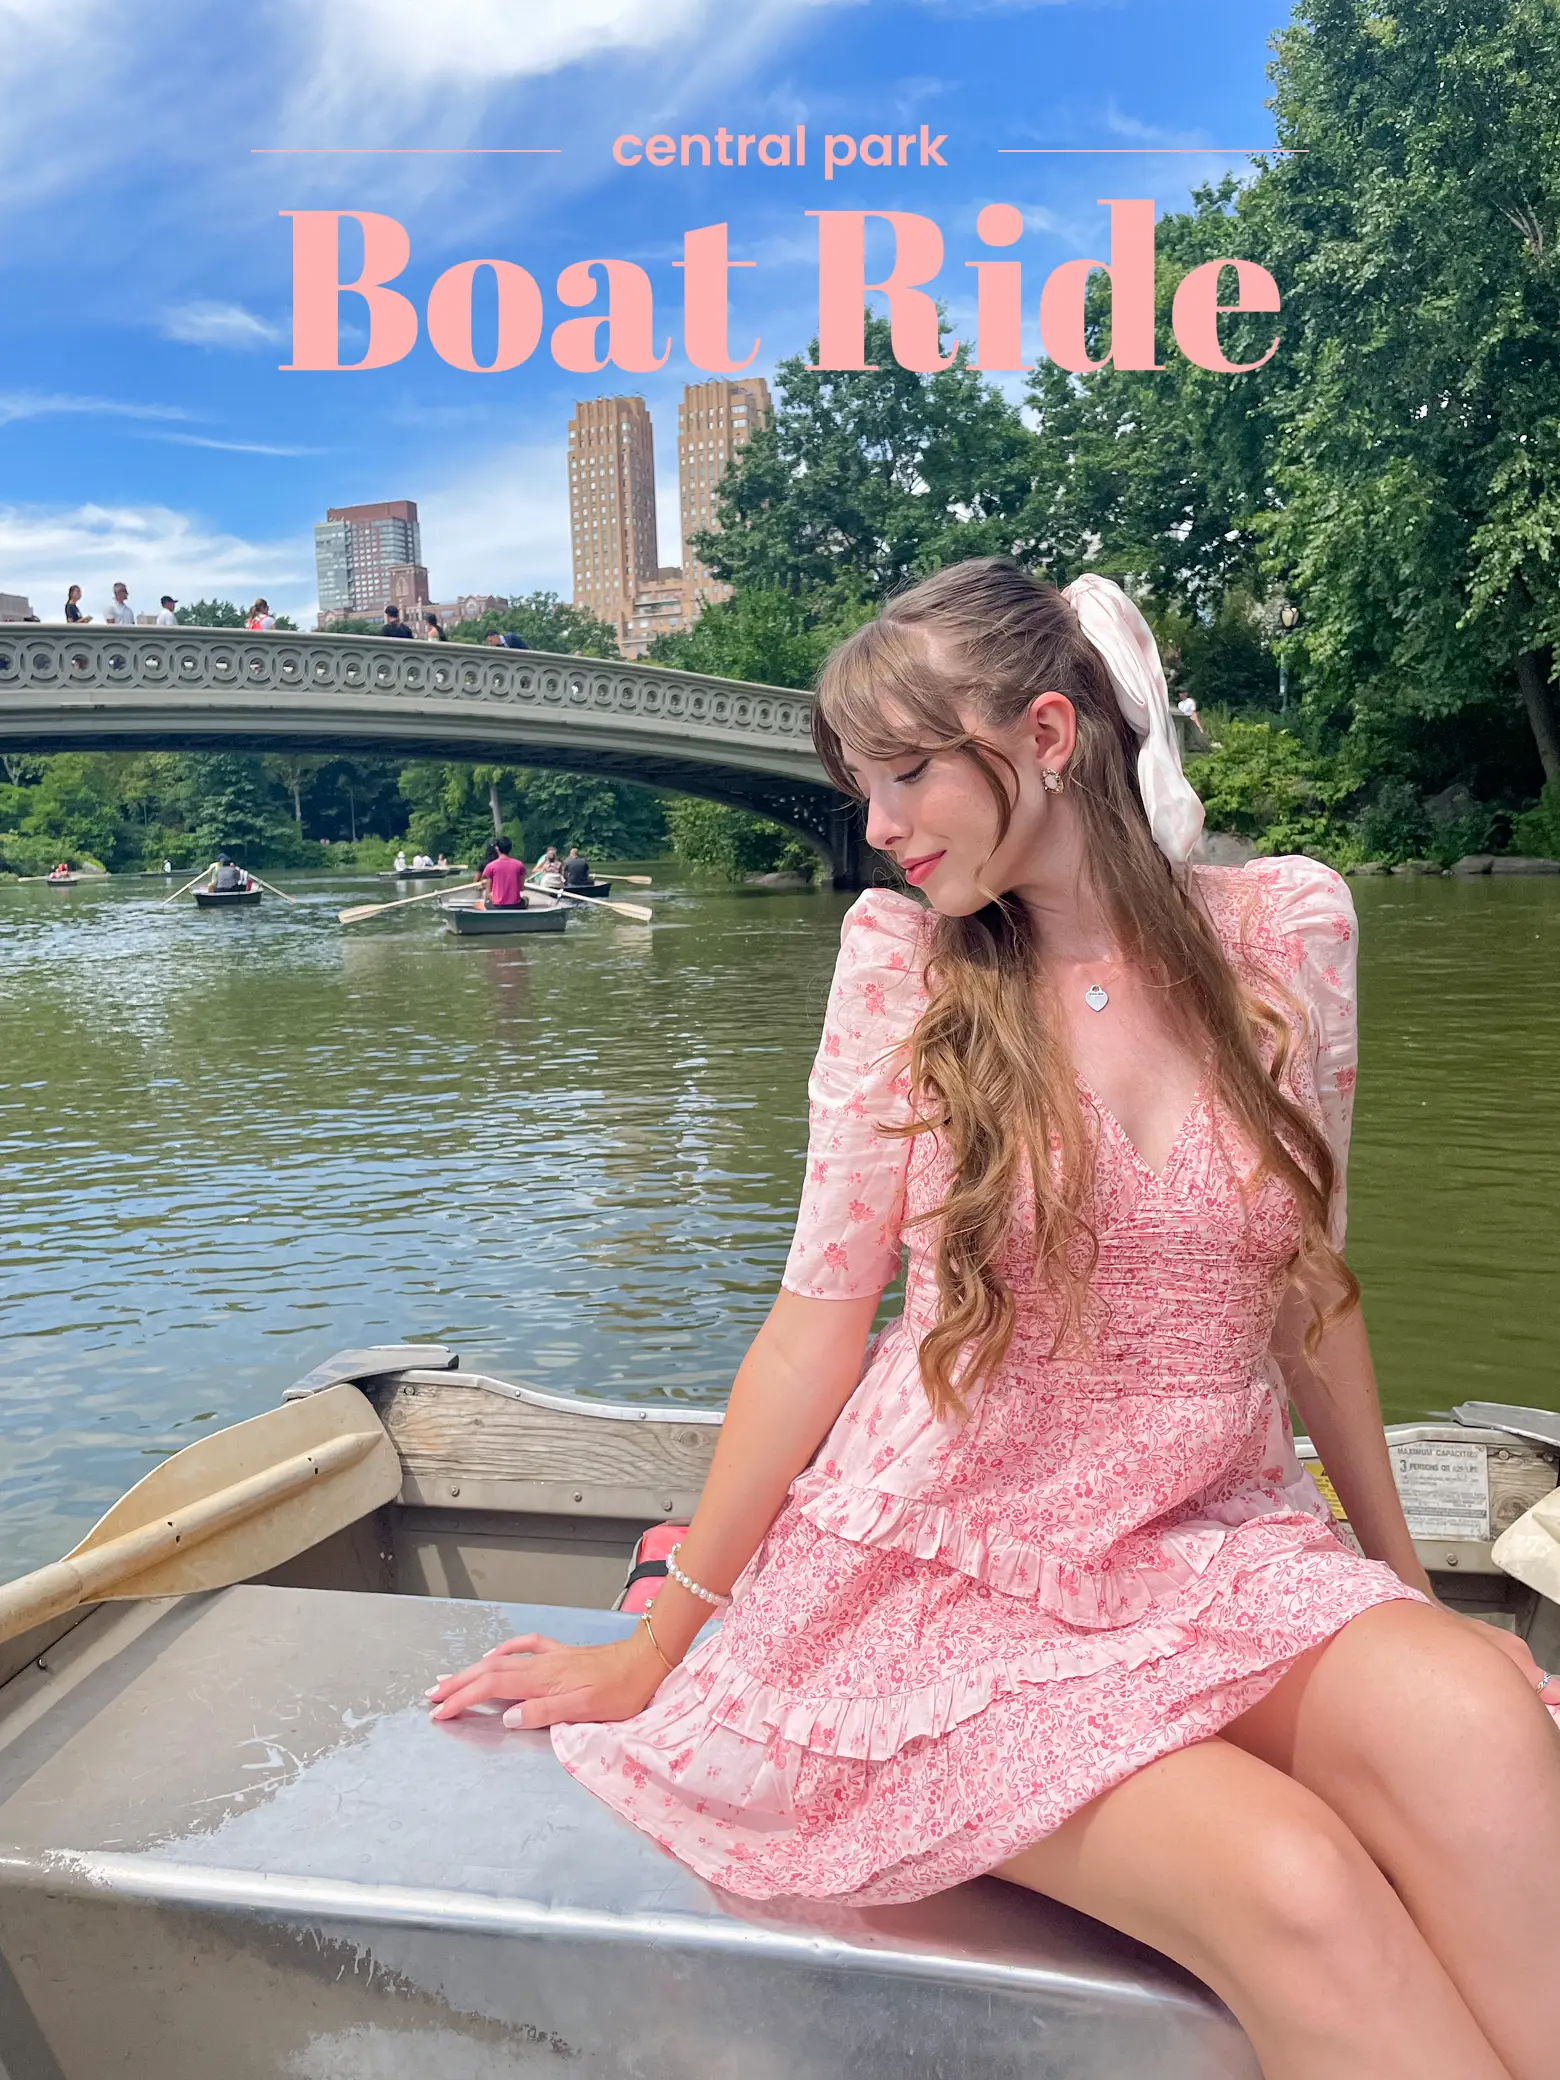  A woman in a pink dress is sitting in a boat.